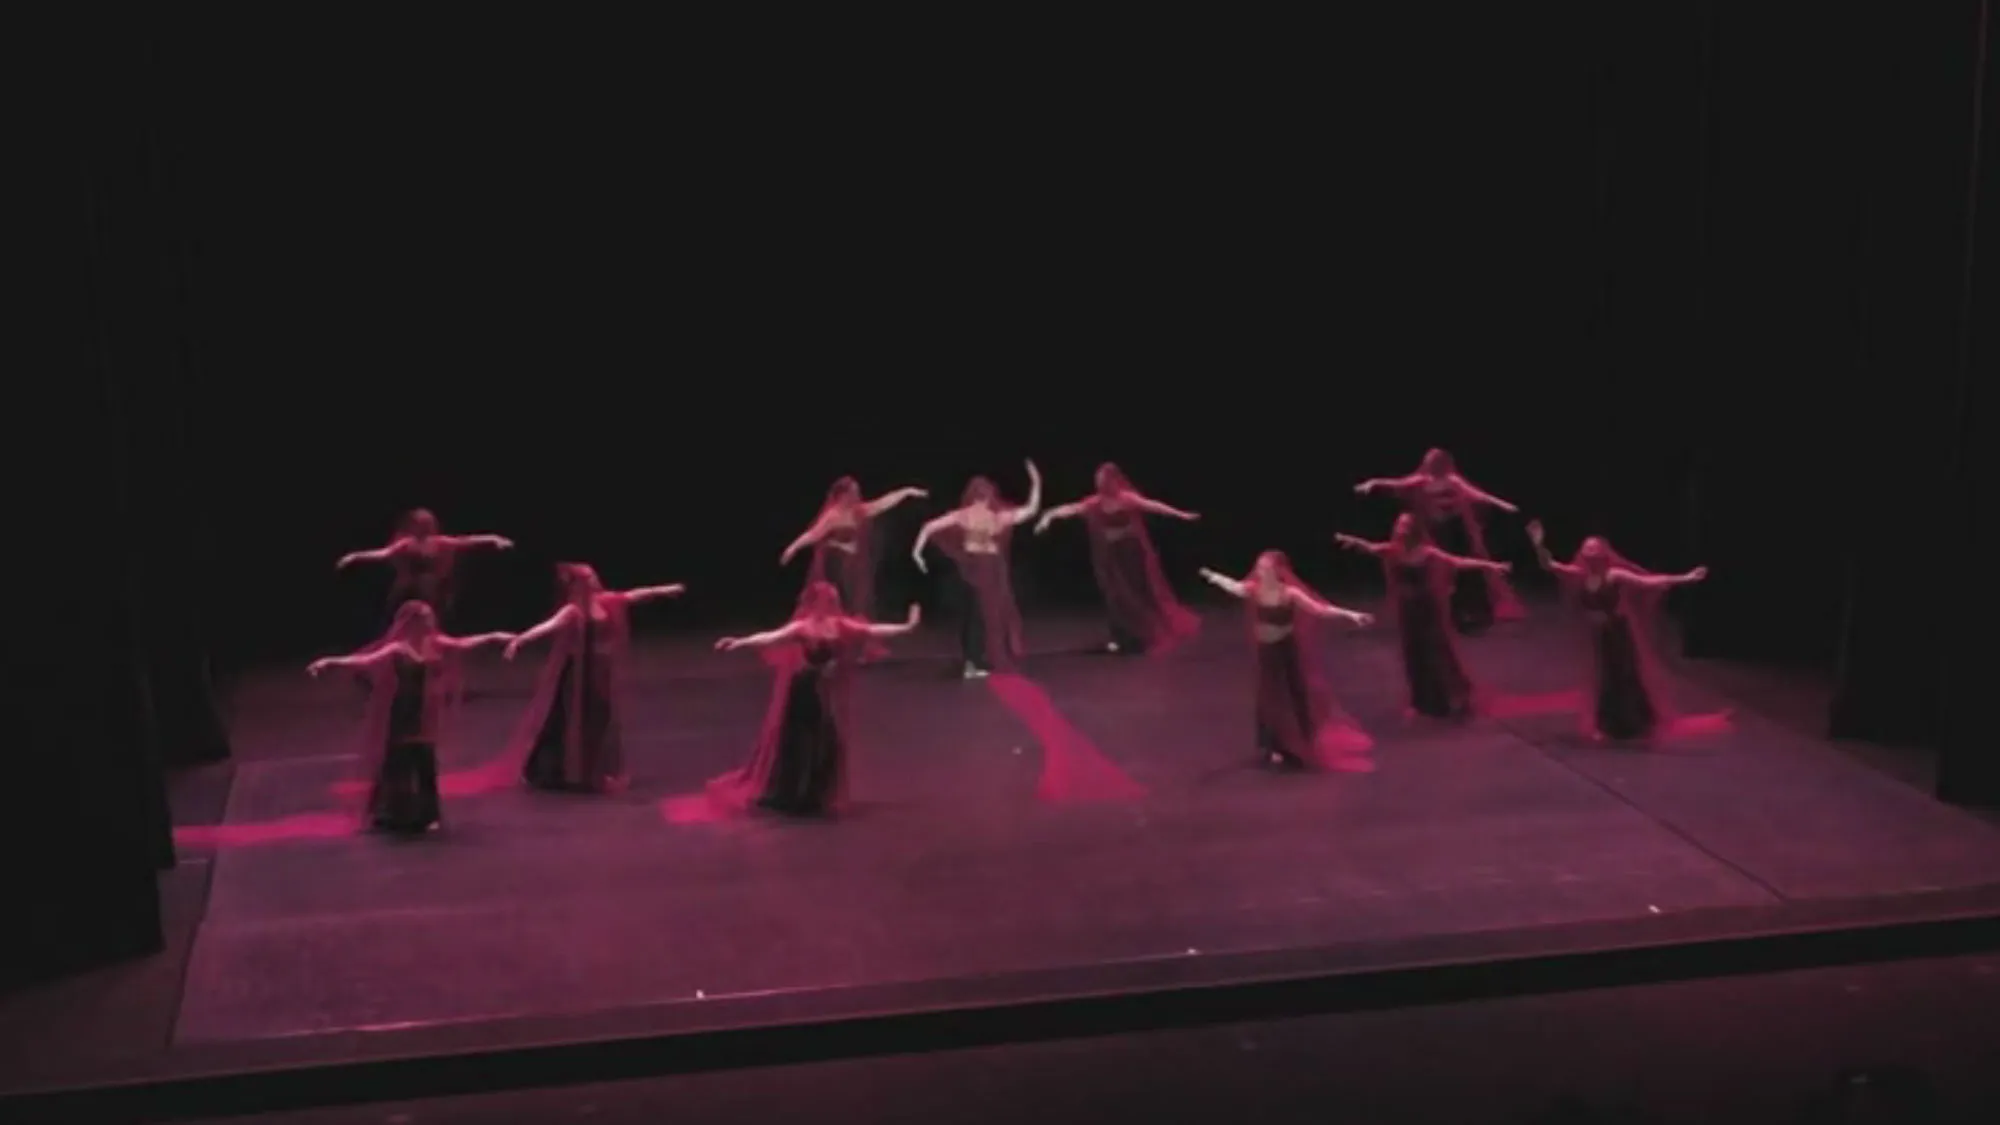 Eleven female dancers on stage wearing sheer red veils and dark dresses, moving towards the center of the pink lit stage with arms outstretched.  